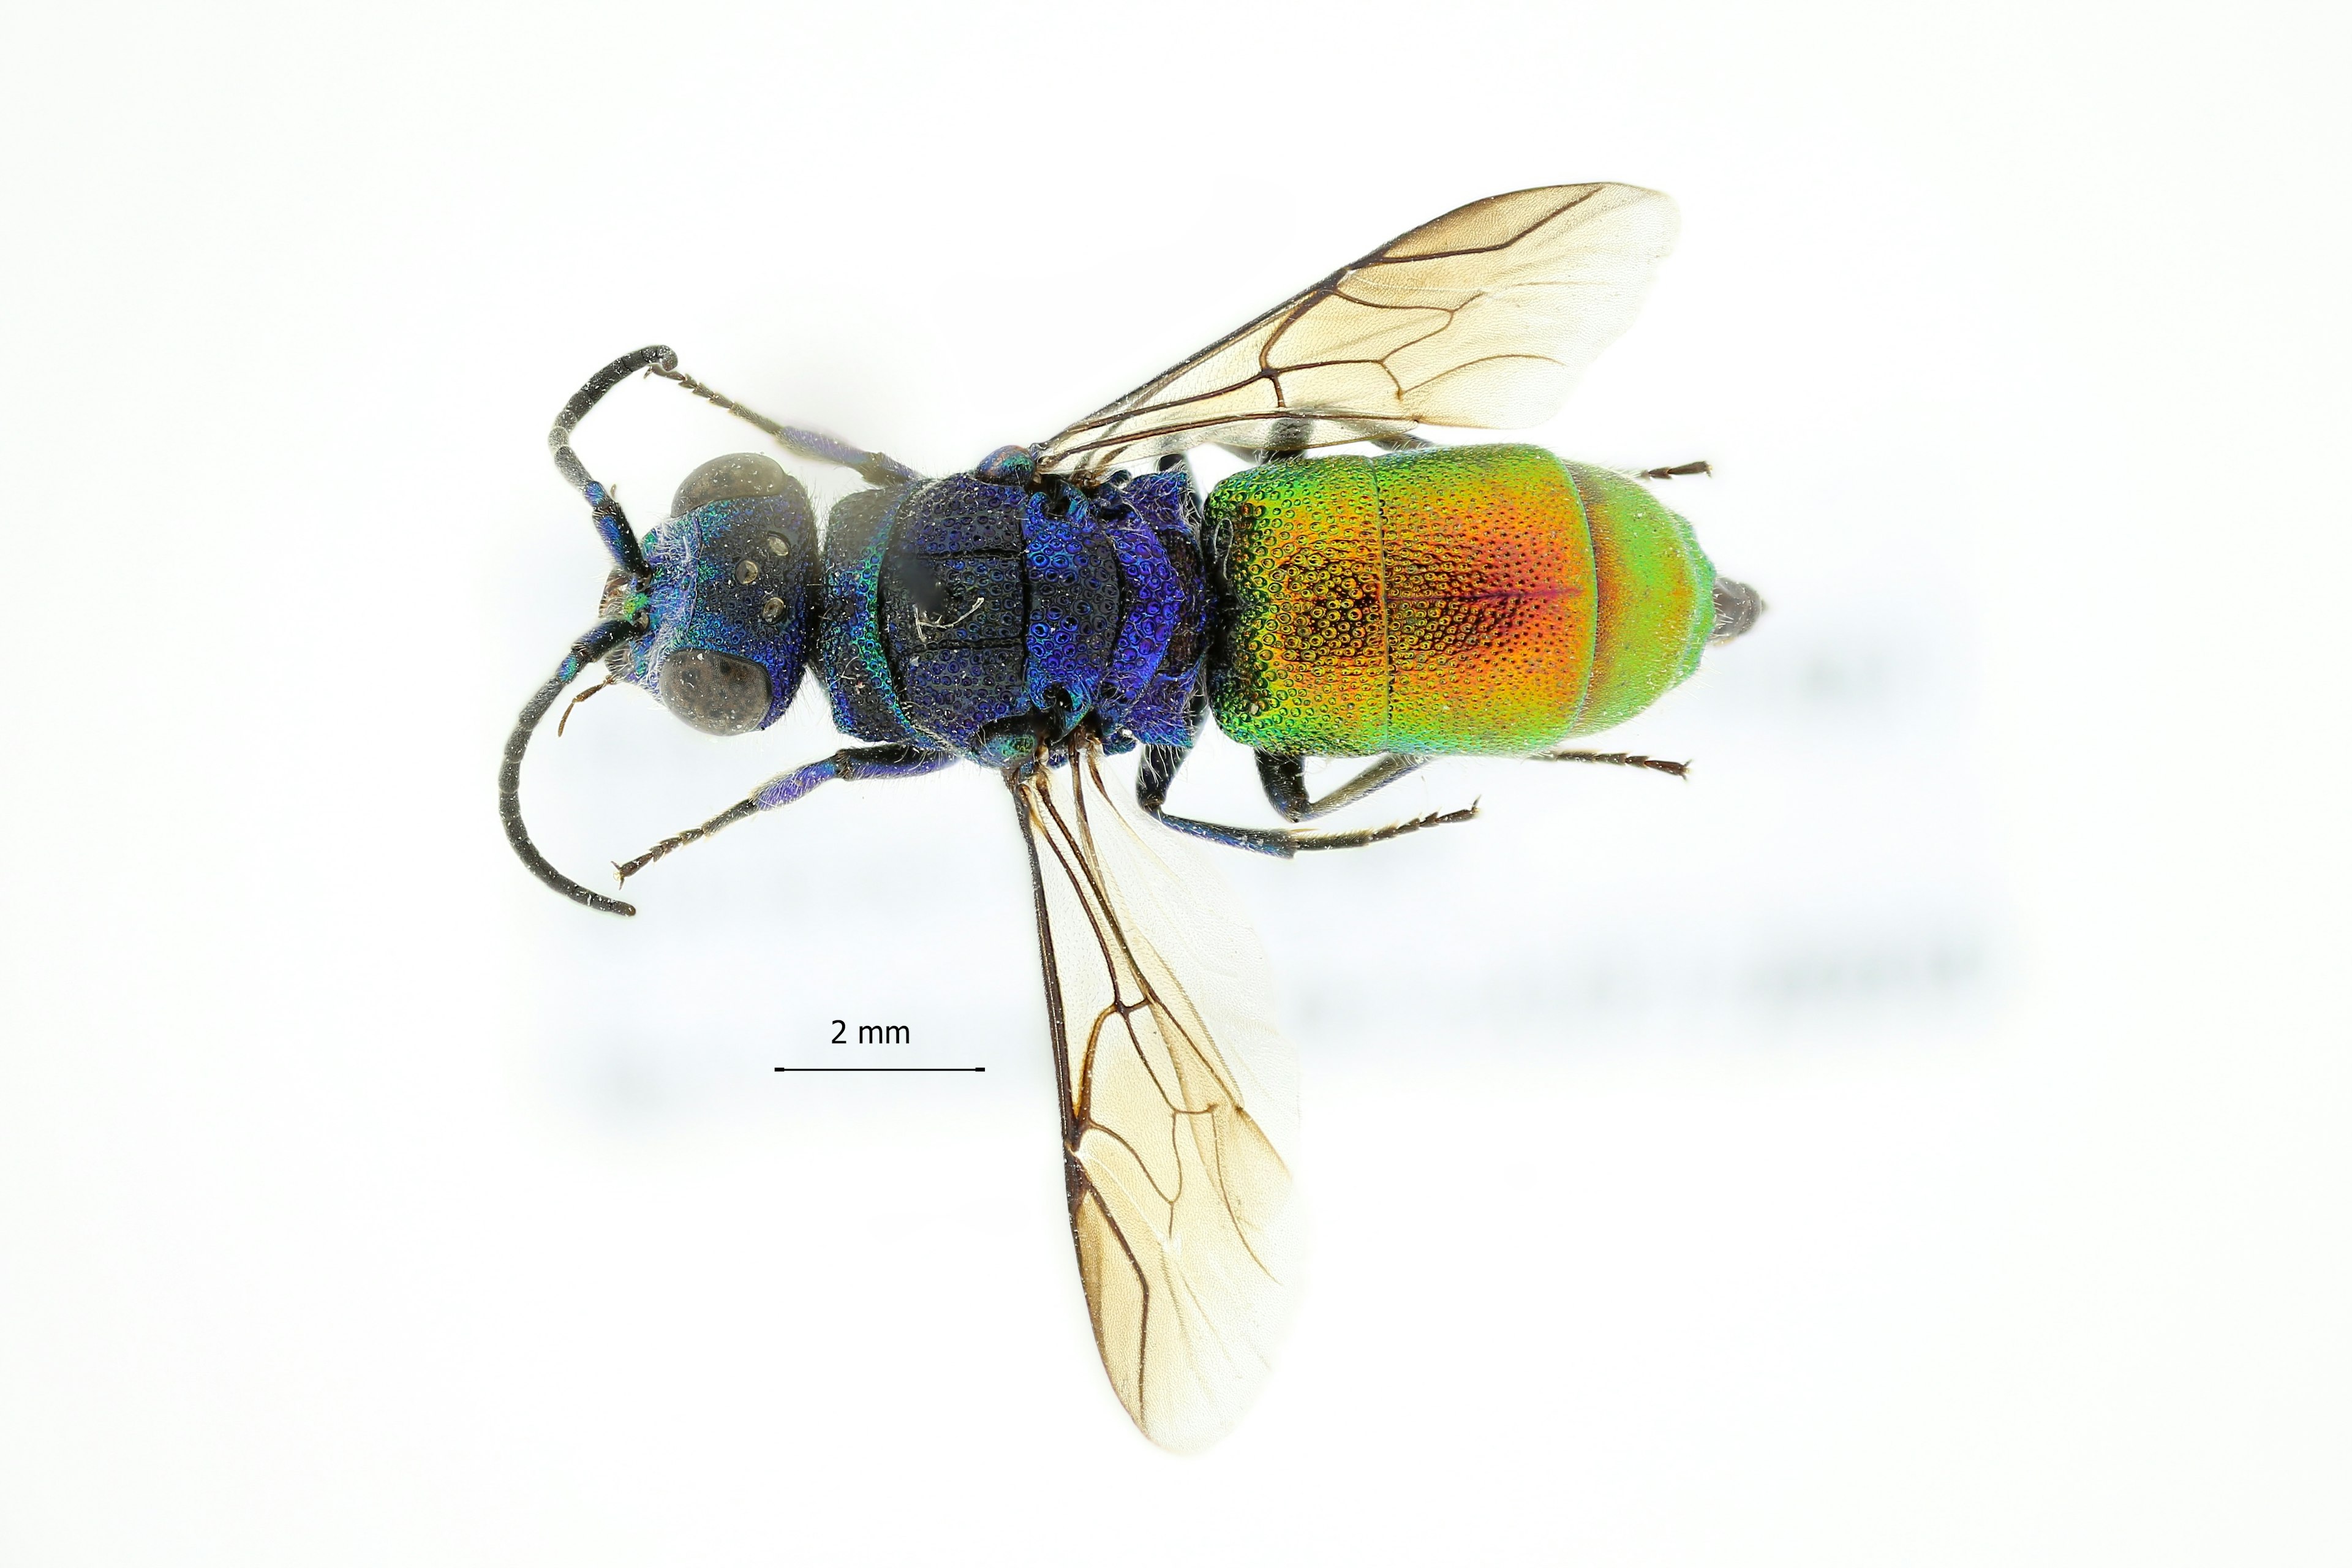 Close-up pictures of the minute new parasite wasp, Chrysis parabrevitarsis